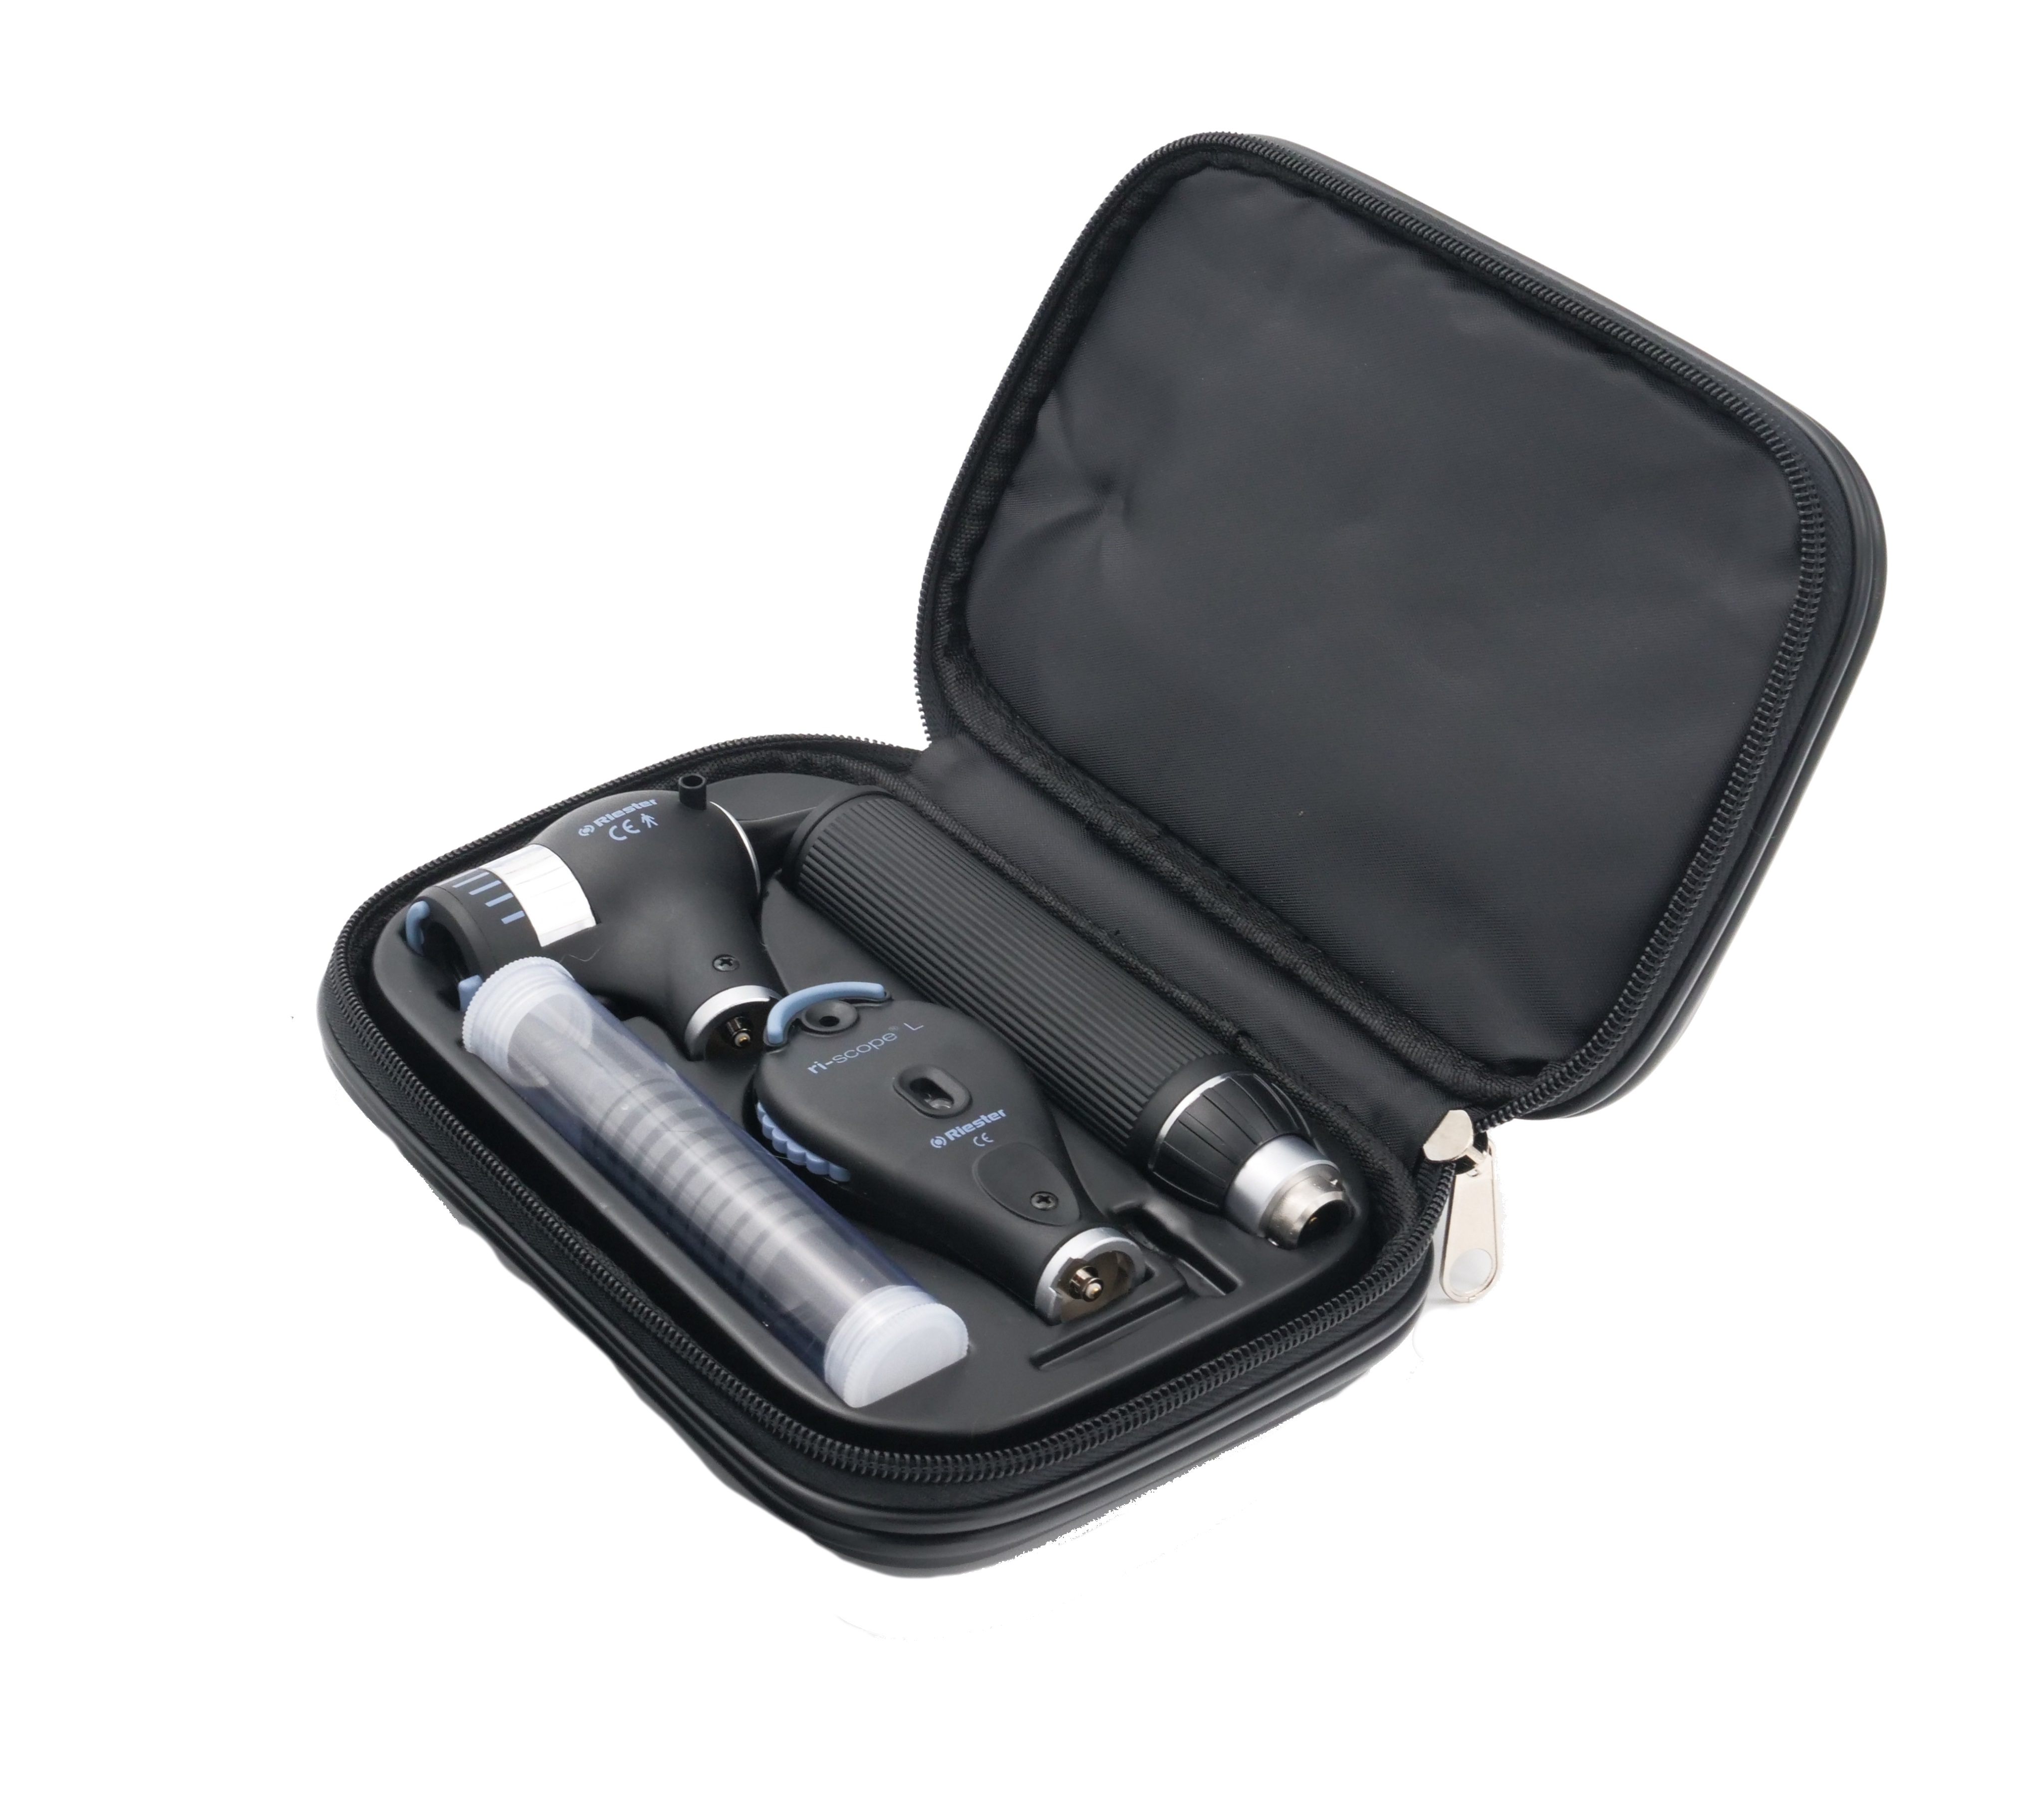 Riester Ri-scope set L2 LED Ophthalmoscope and EliteVue Otoscope 3.5V in Carry Case